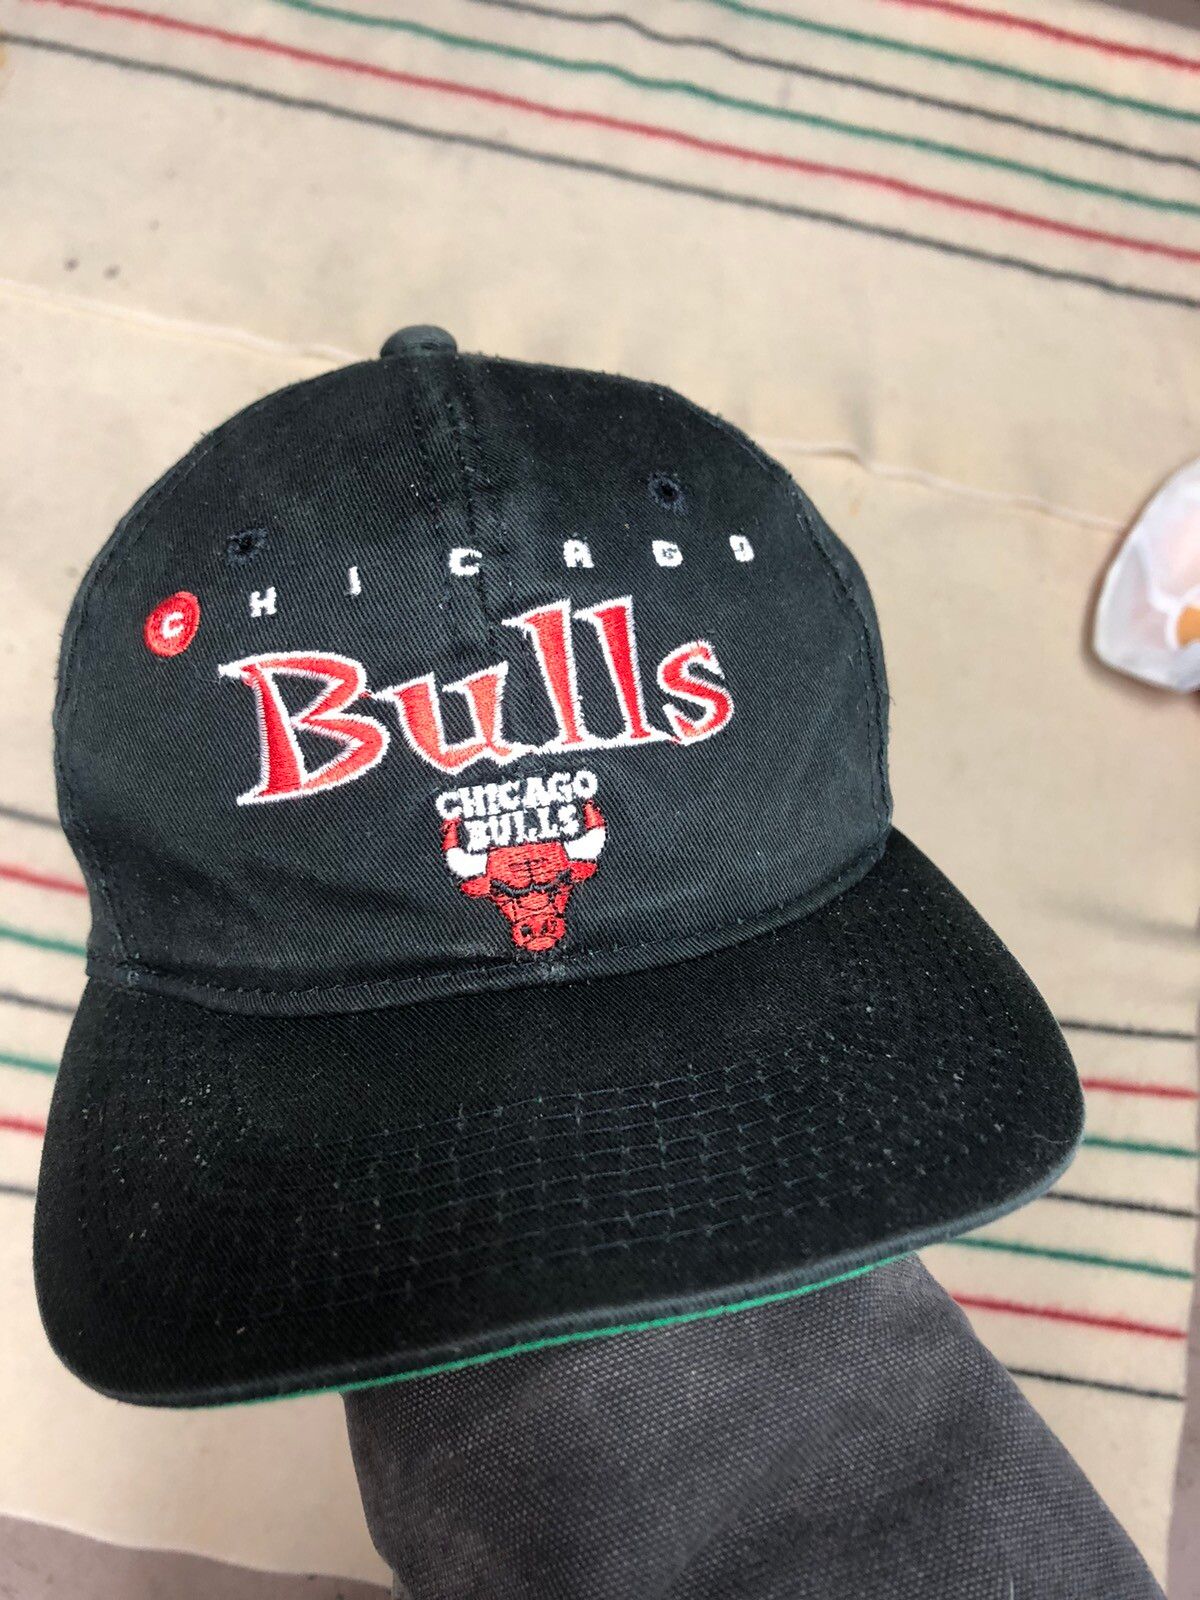 Vintage Vintage sports specialties SnapBack hat Chicago bulls rare Size ONE SIZE - 1 Preview